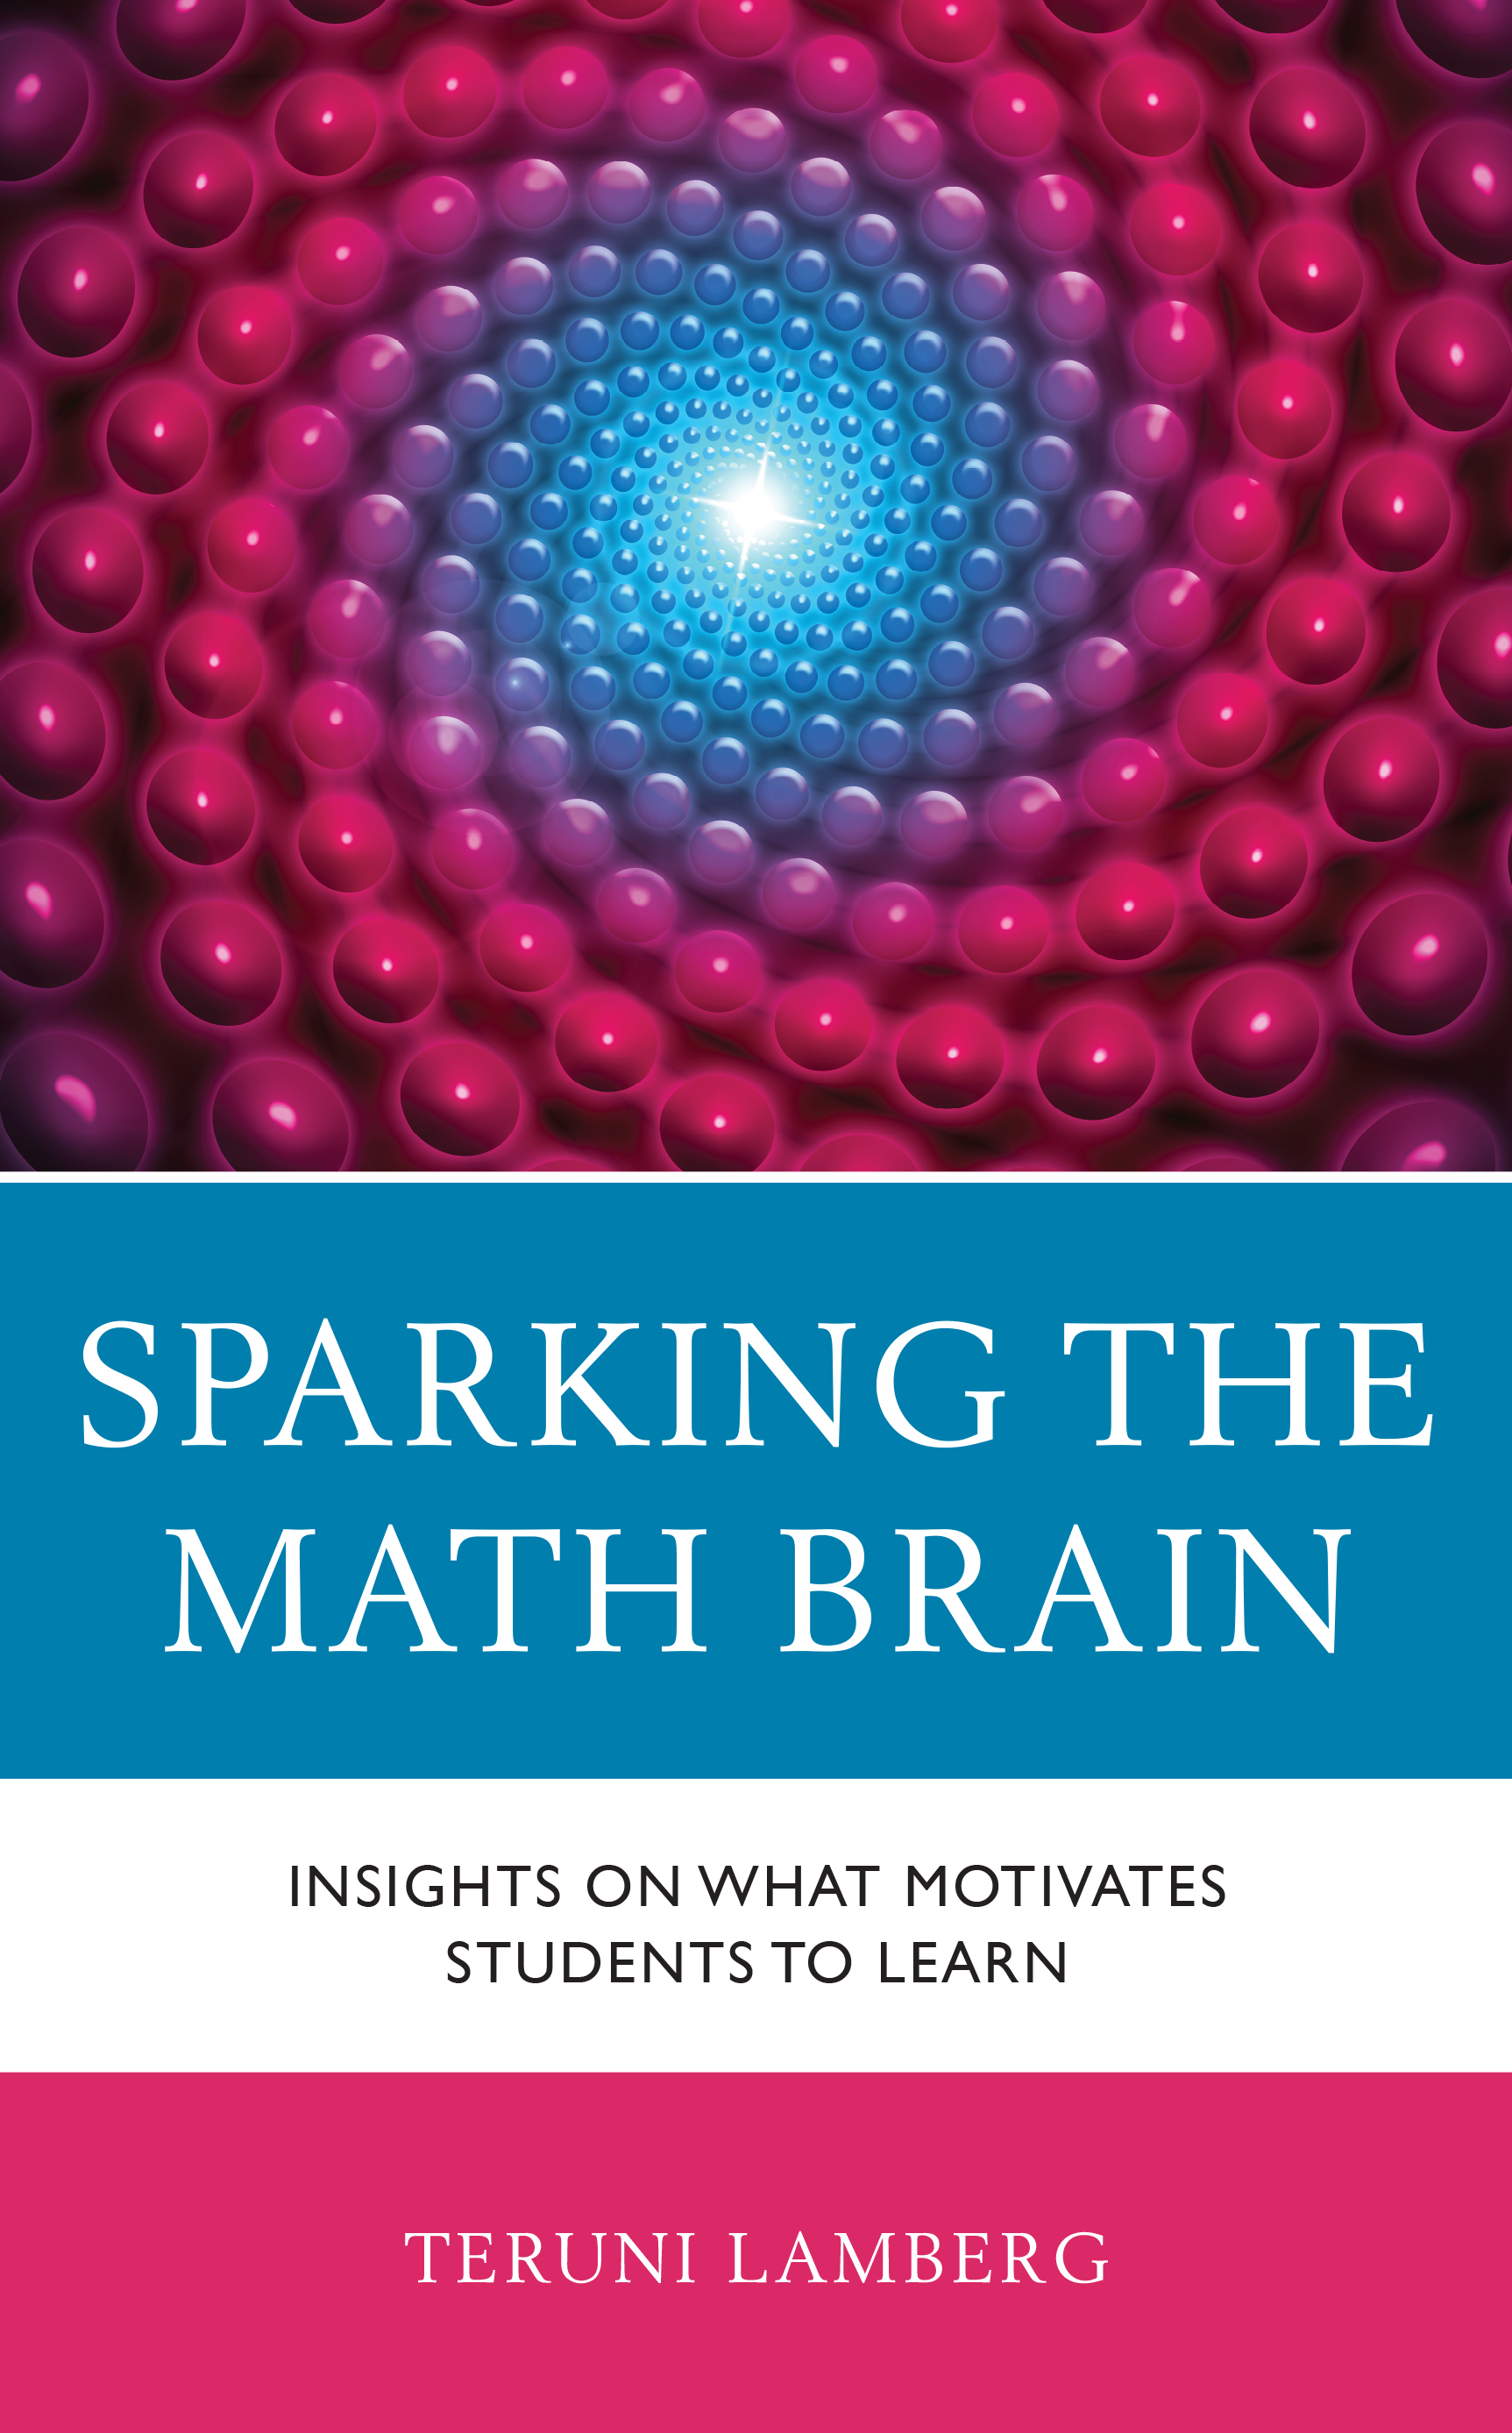 Sparking the Math Brain: Insights on What Motivates Students to Learn